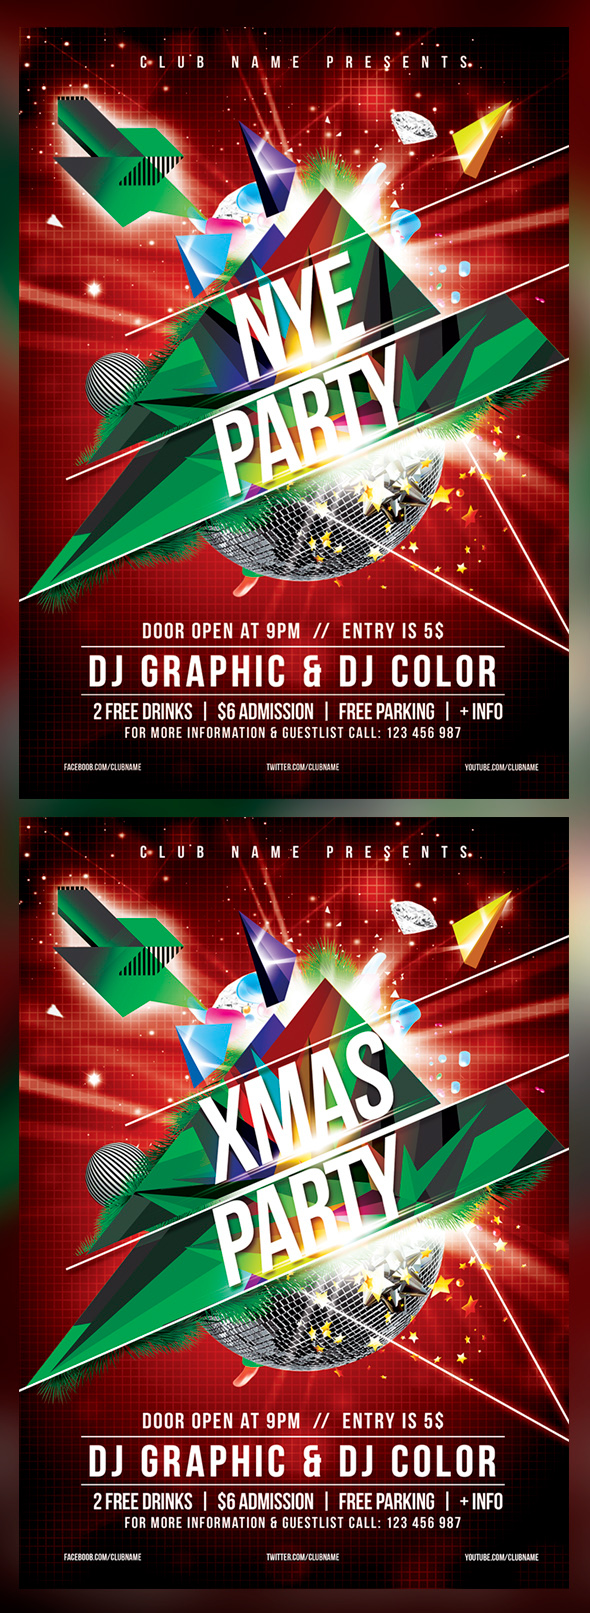 Eve Event Merry Christmas modern new year Nye party flyer psd winter xmas Christmas